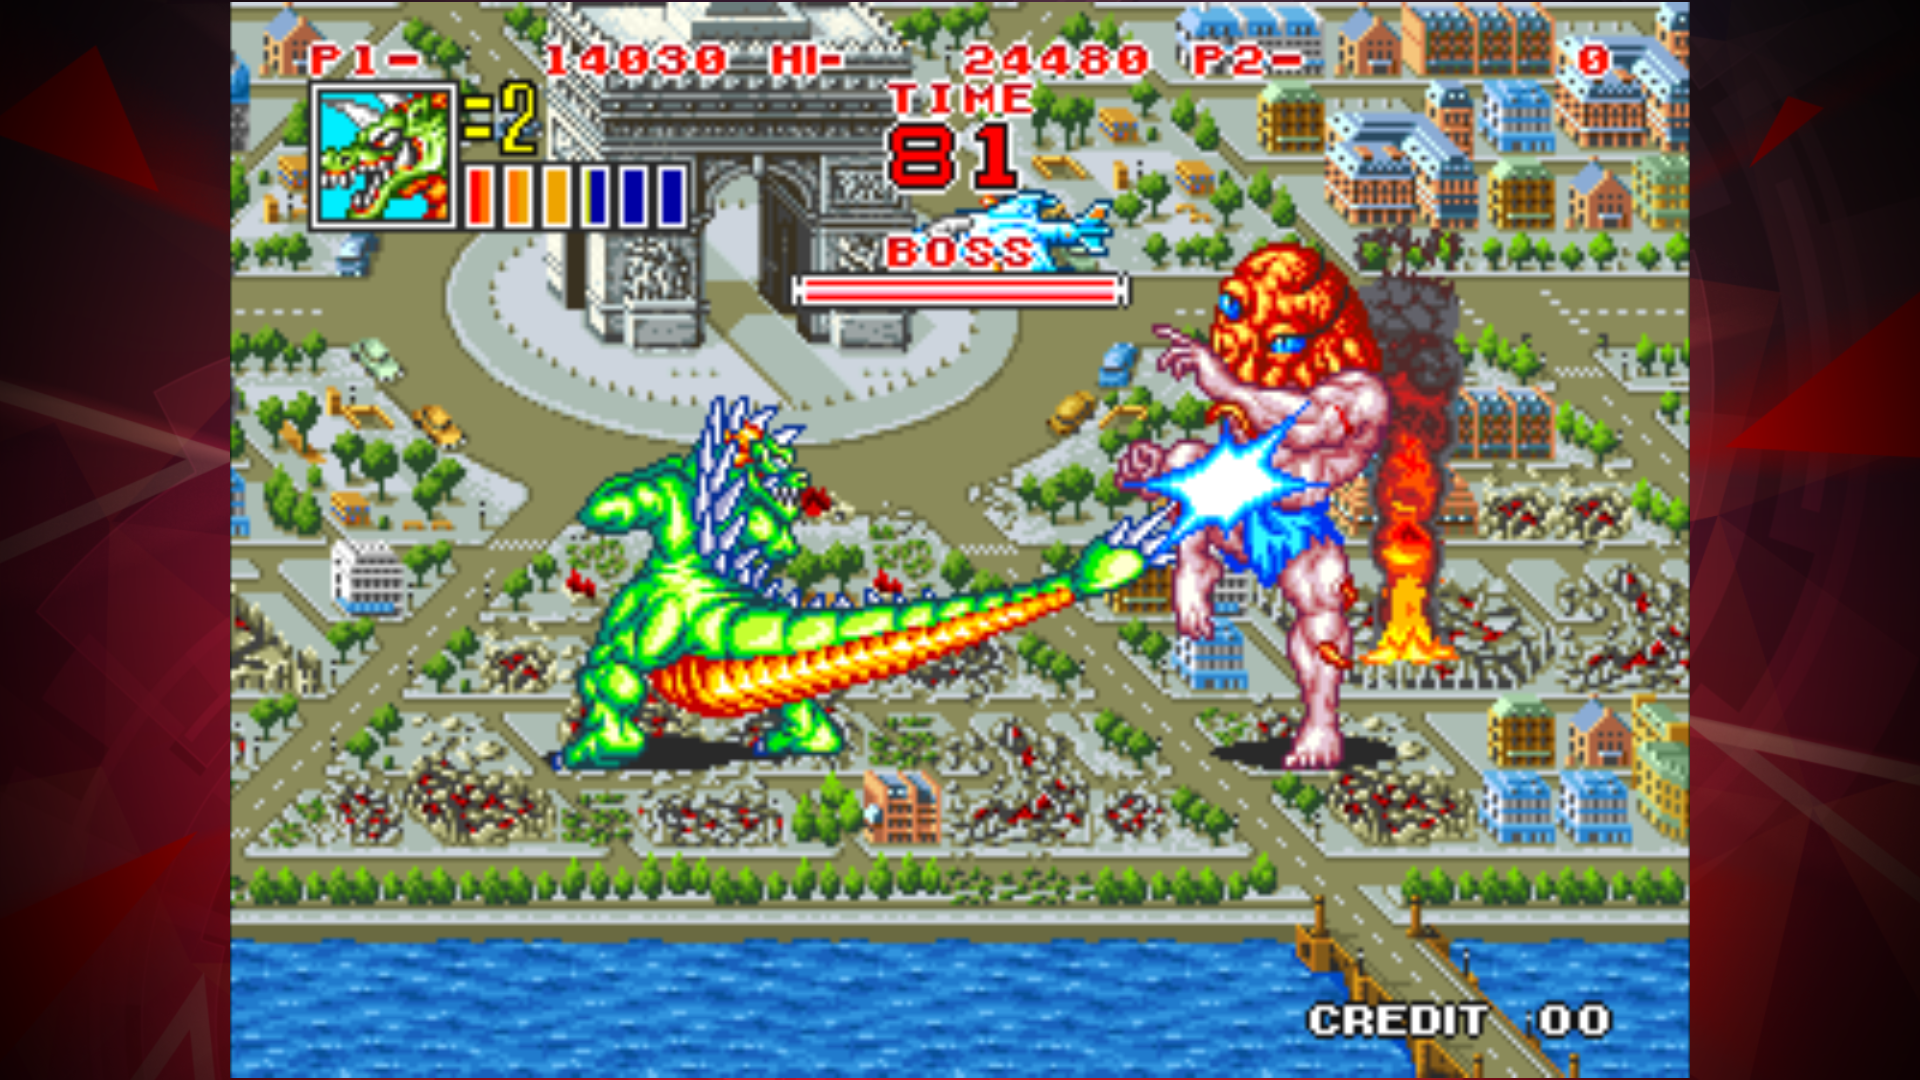 1992-Released Action Game 'King of the Monsters 2' ACA NeoGeo From